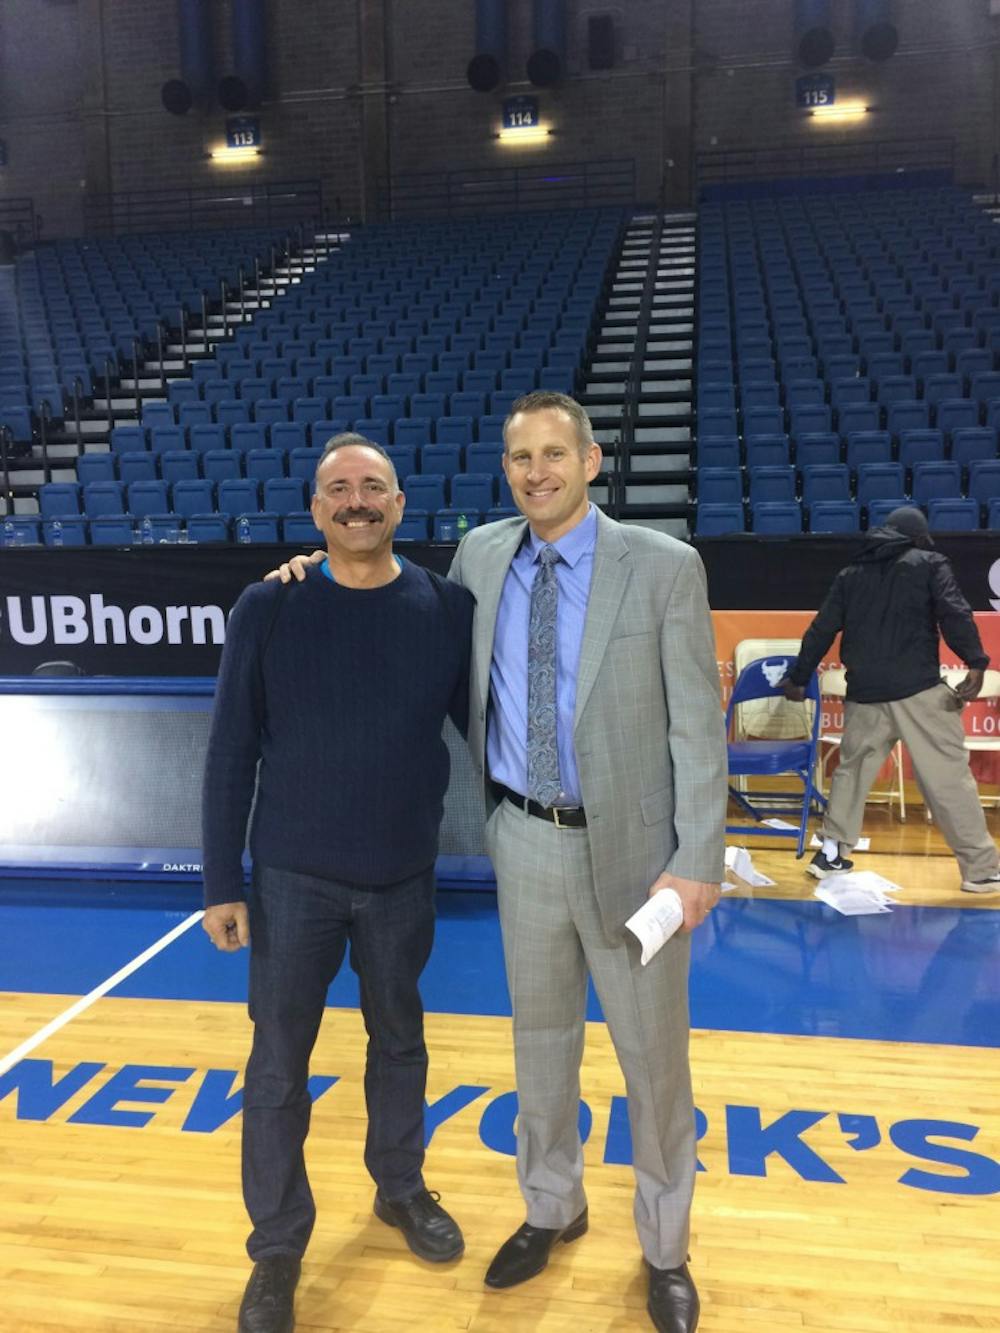 <p>Daniel Nardini (left) stands with men’s basketball head coach Nate Oats. The two spoke about his journey and UCONN basketball after a game against Saint Francis.</p>